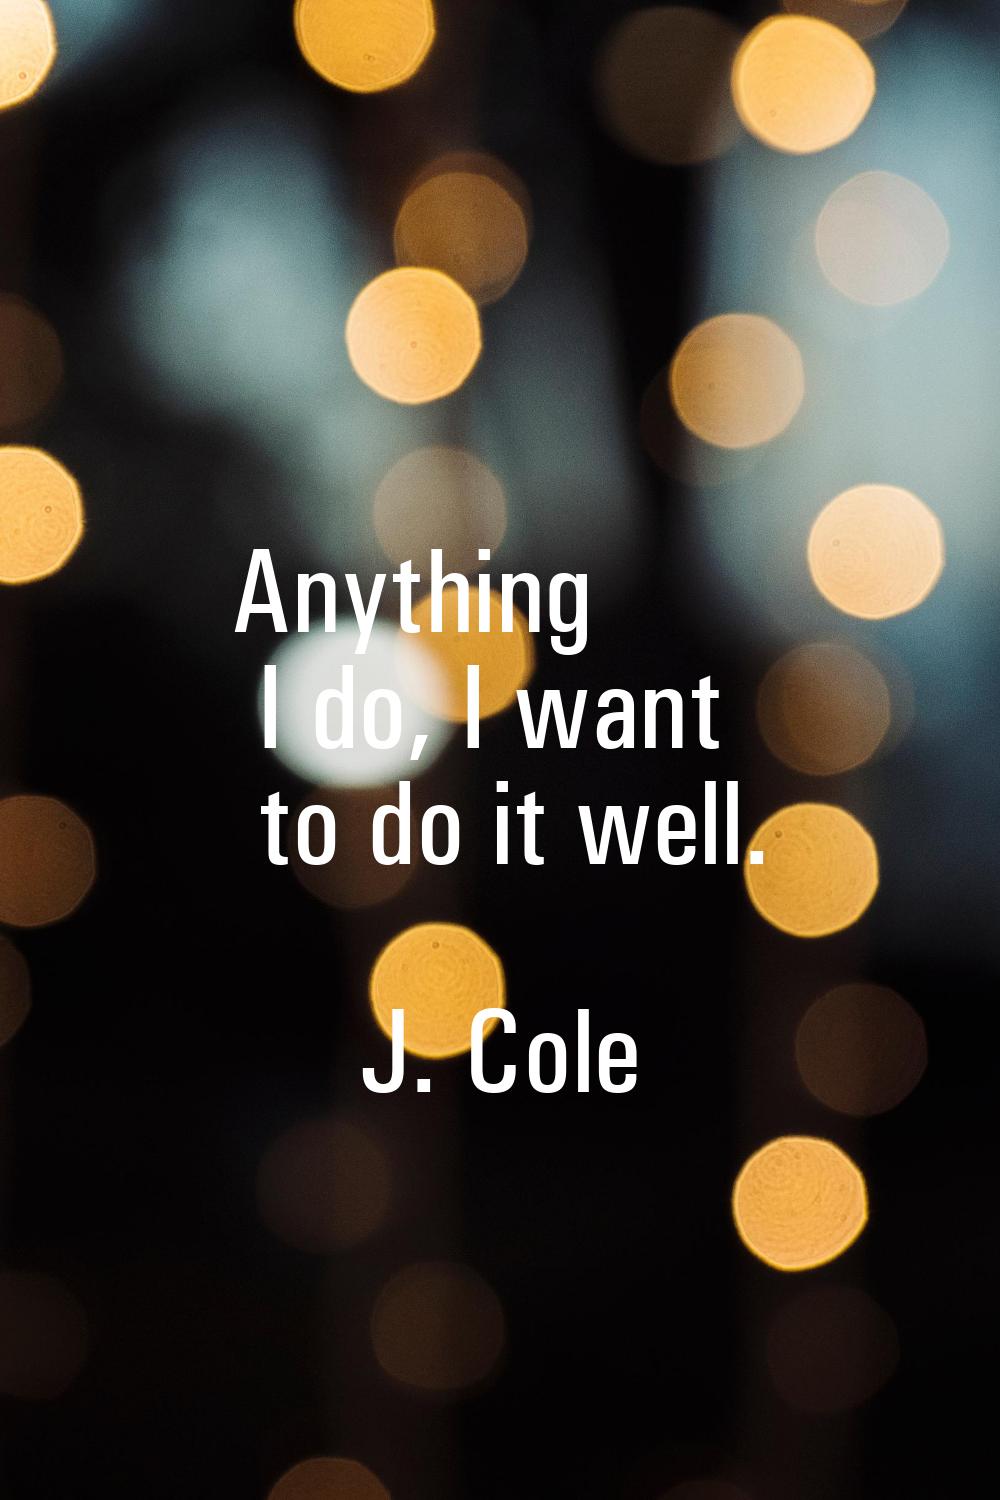 Anything I do, I want to do it well.